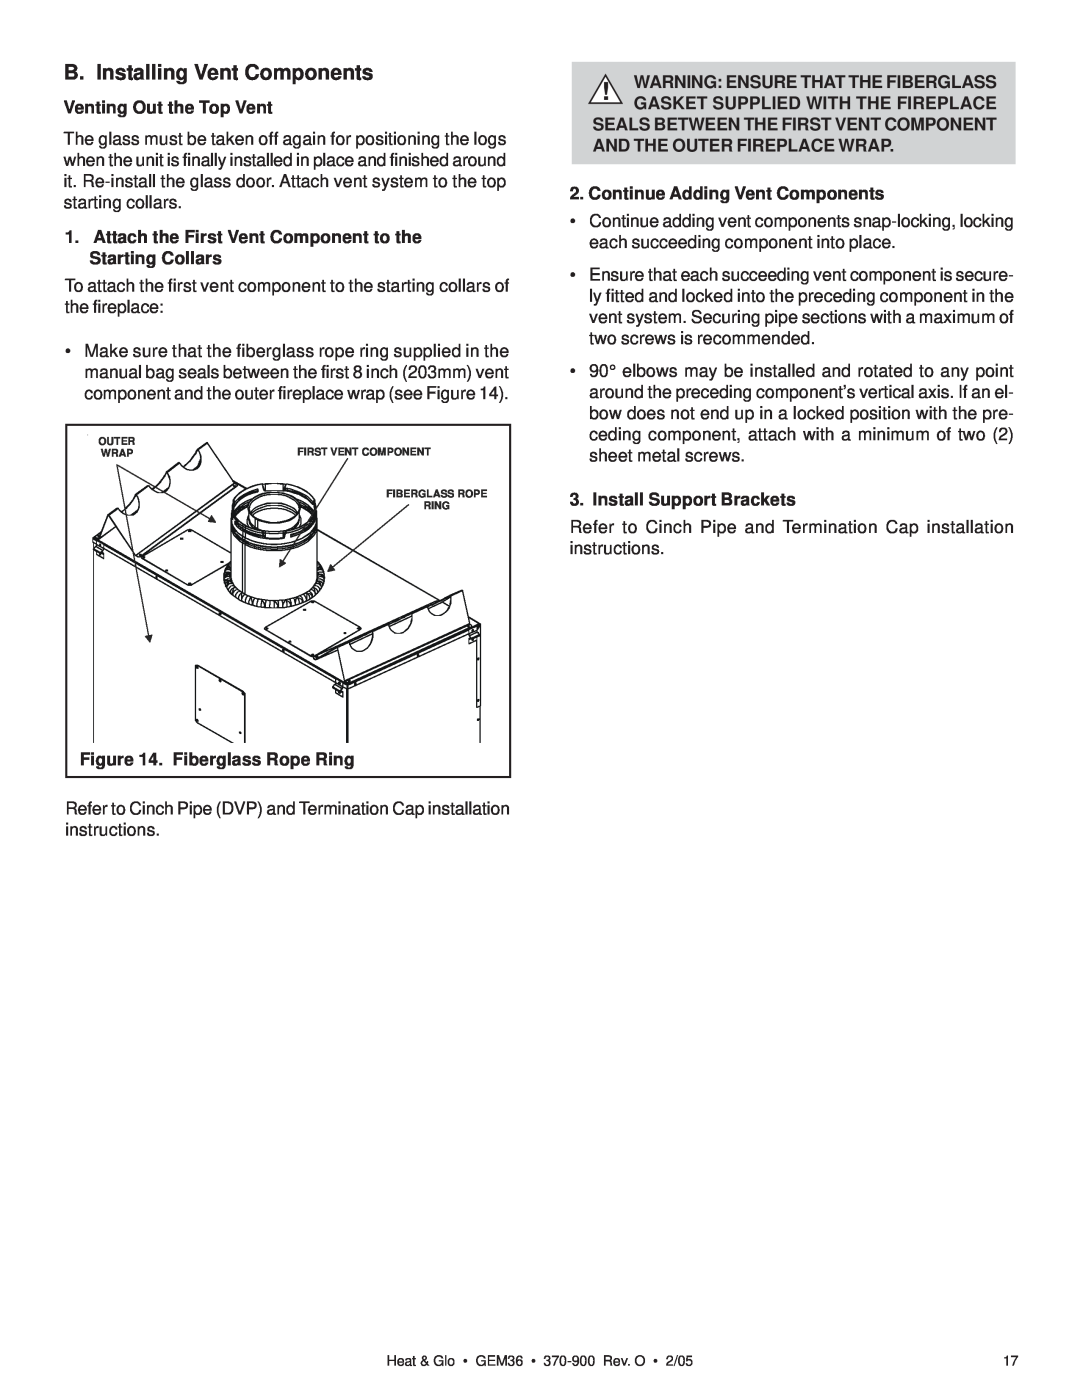 Heat & Glo LifeStyle GEM36 manual B. Installing Vent Components, Venting Out the Top Vent, Fiberglass Rope Ring 